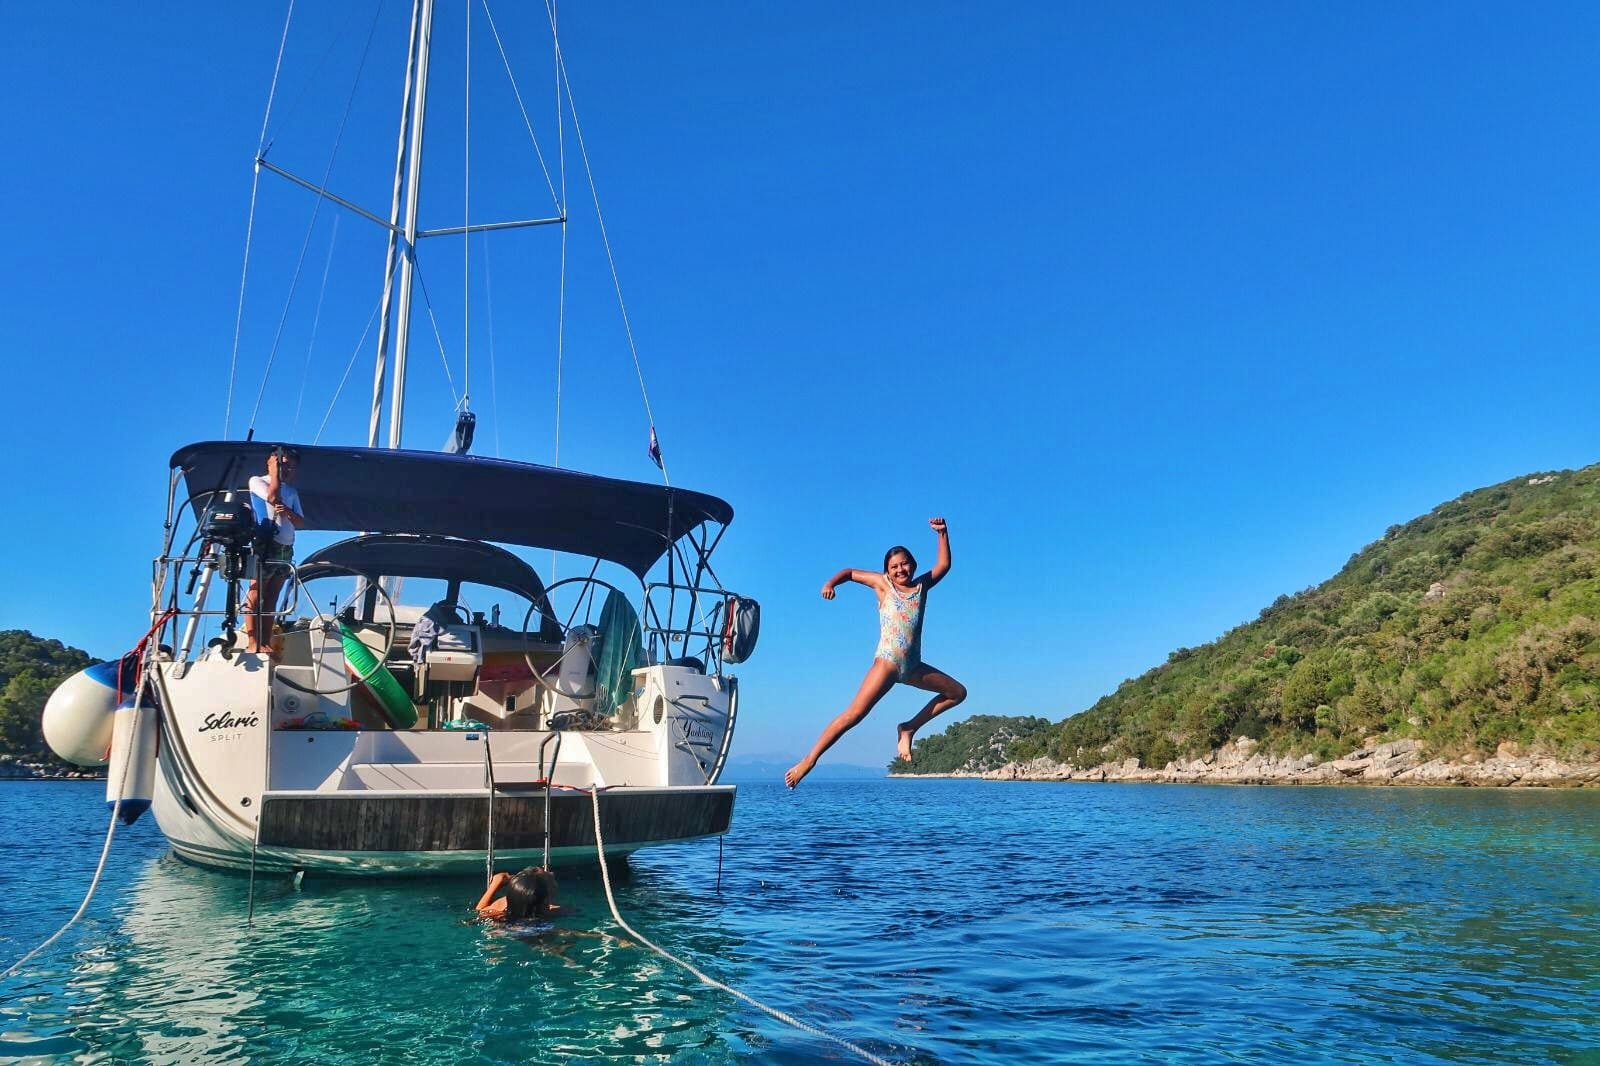 Children jumping in the sea from the yacht on a sailing vacation in Croatia